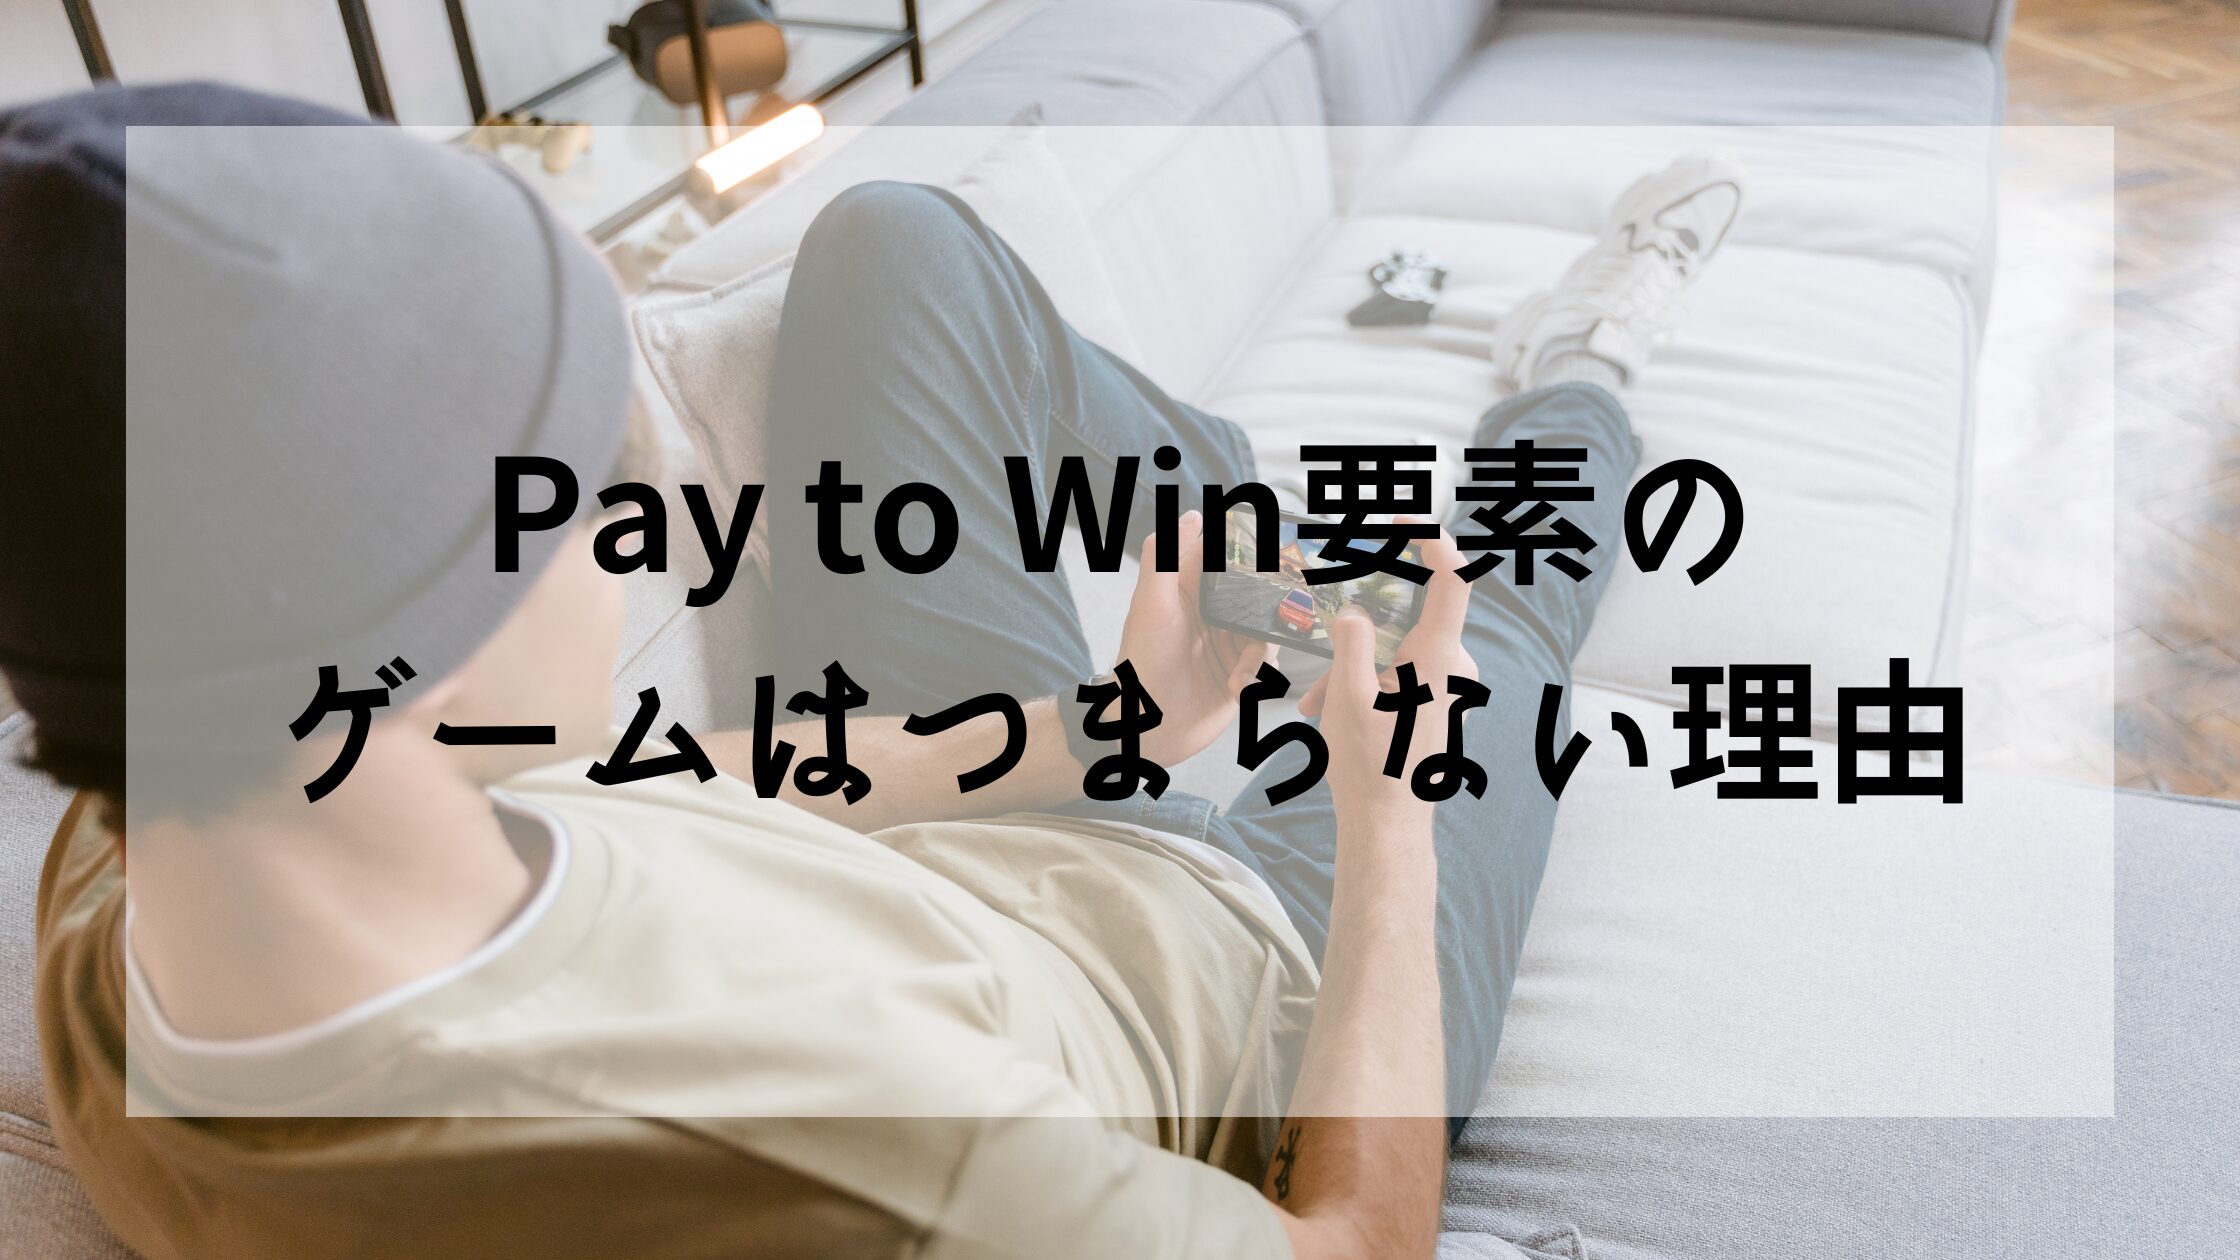 Pay to Win要素のゲームはつまらない理由